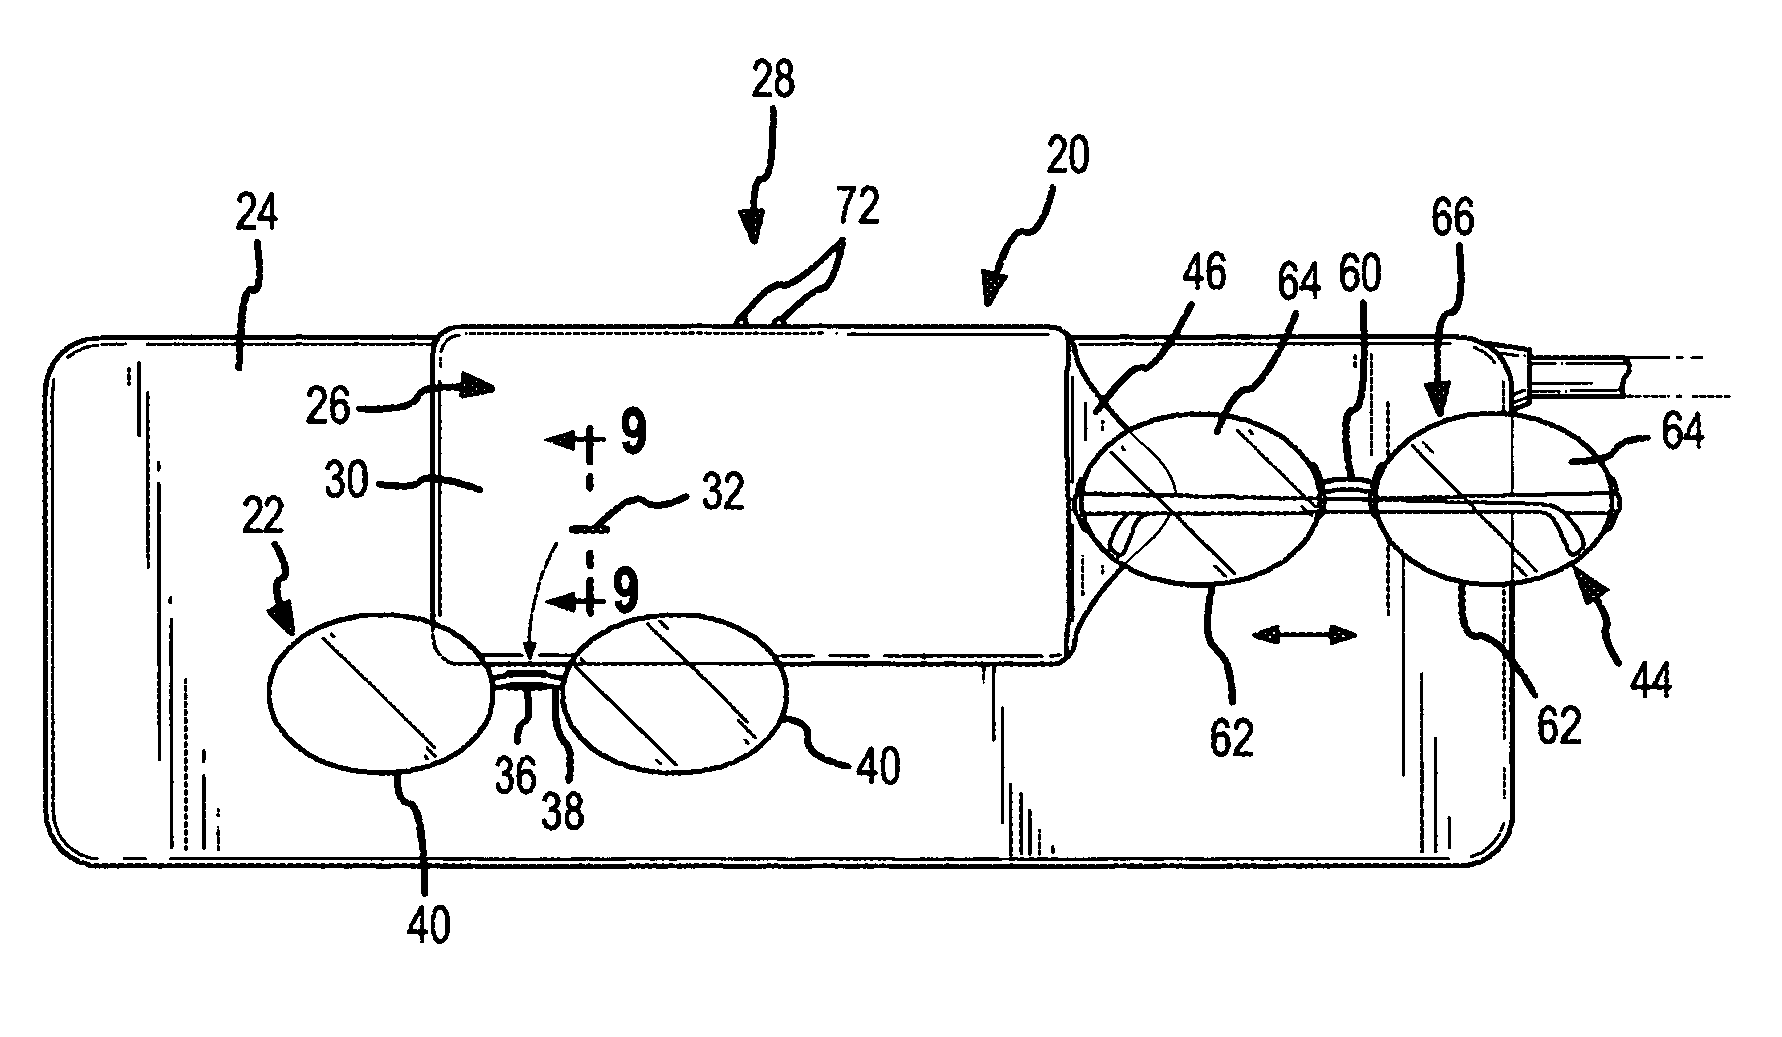 Apparatus and method for retaining and accessing clip-on sunglasses